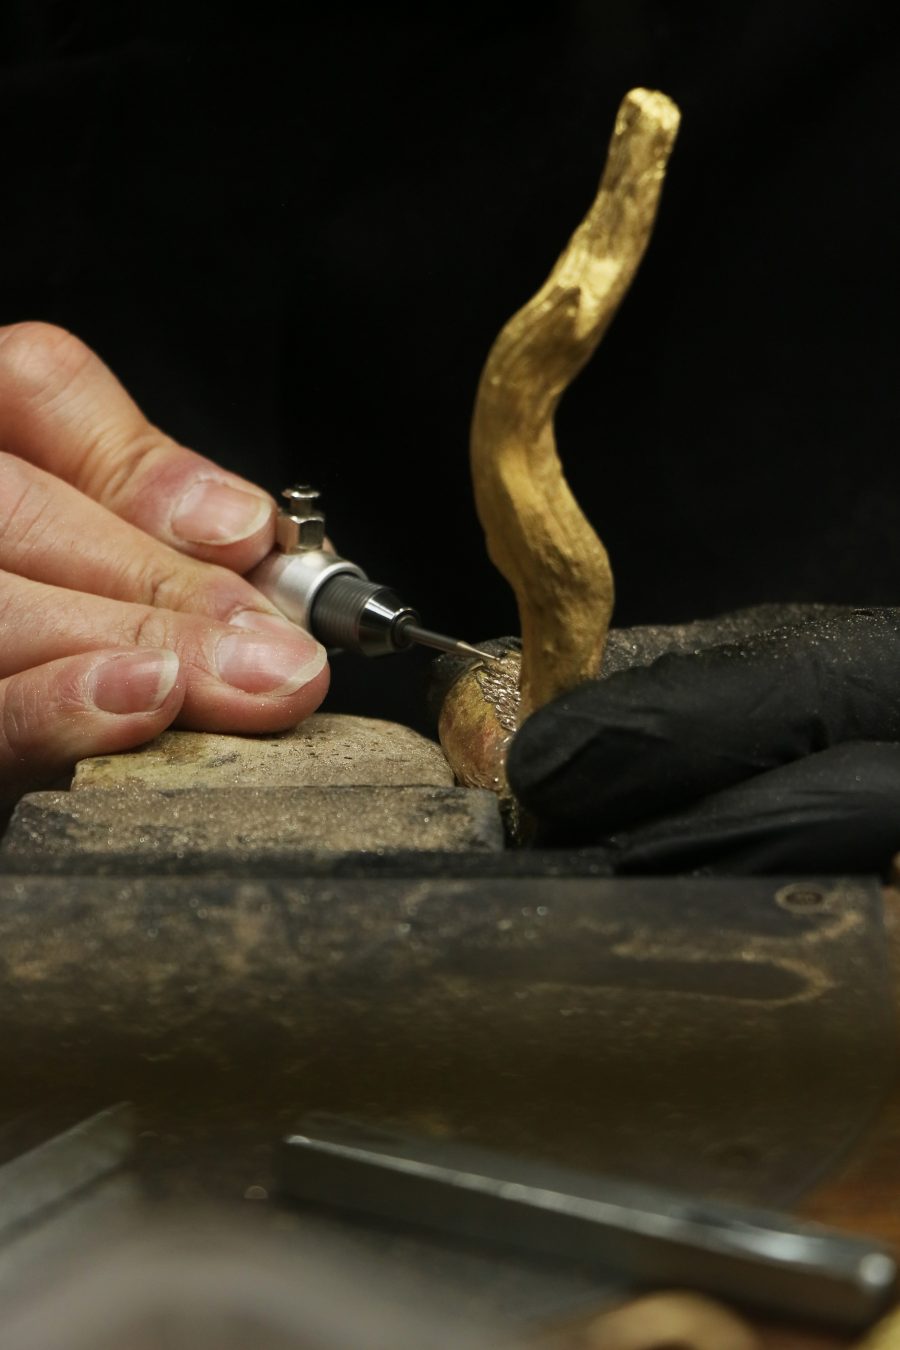 HOW TO EMBRACE IMPERFECTION: THE BEAUTY OF HANDCRAFTED HARDWARE